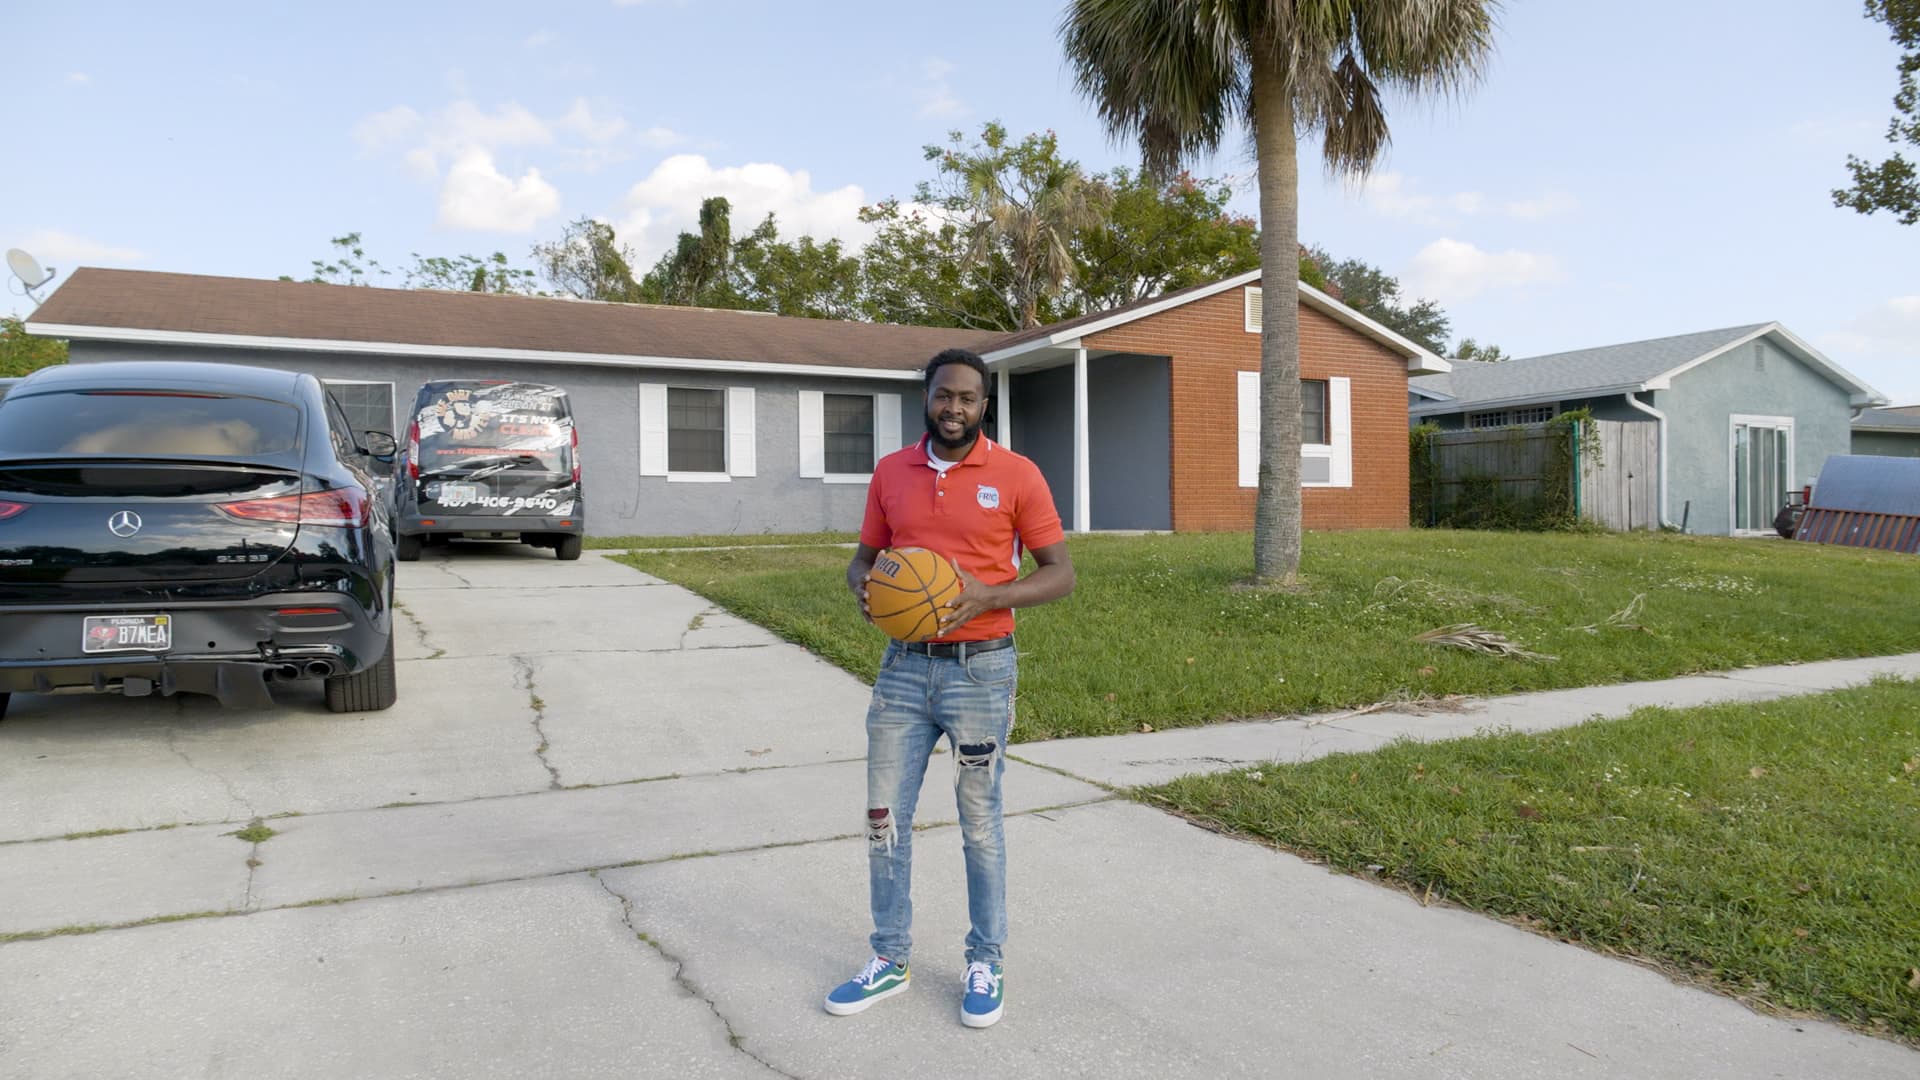 Mckenzie purchased his 4-bedroom, 2-bathroom childhood home for $220,000 in 2021.